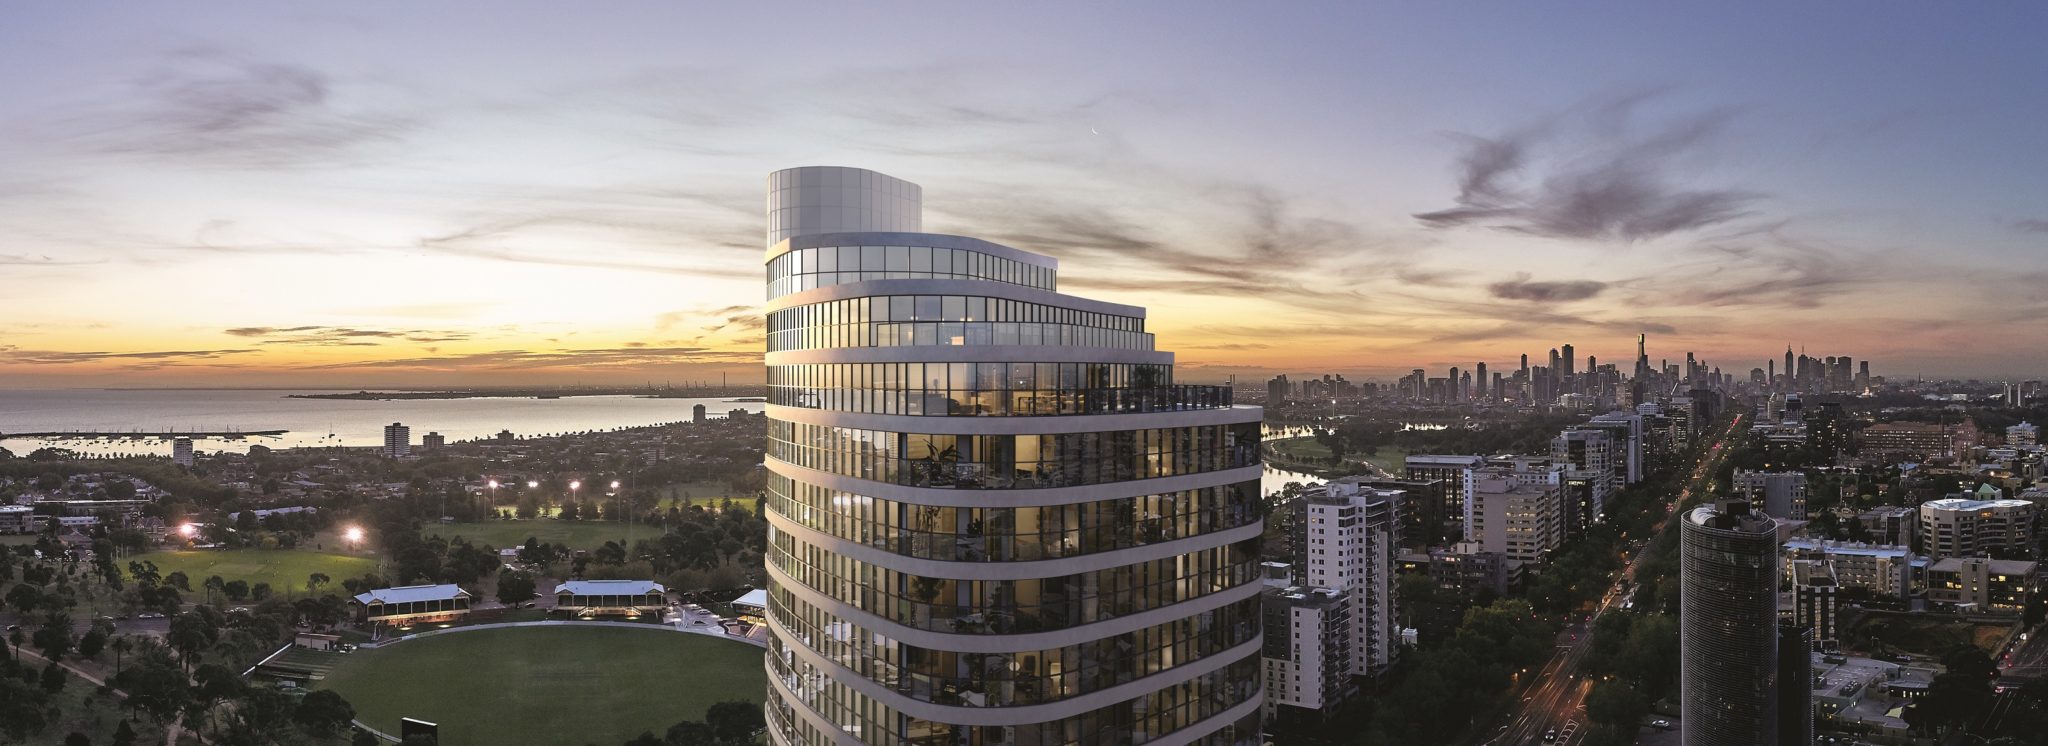 POINT POLARIS APPOINTED AS PROJECT MANAGER OF ONE WELLINGTON TO DELIVER AN ADDRESS LESS ORDINARY